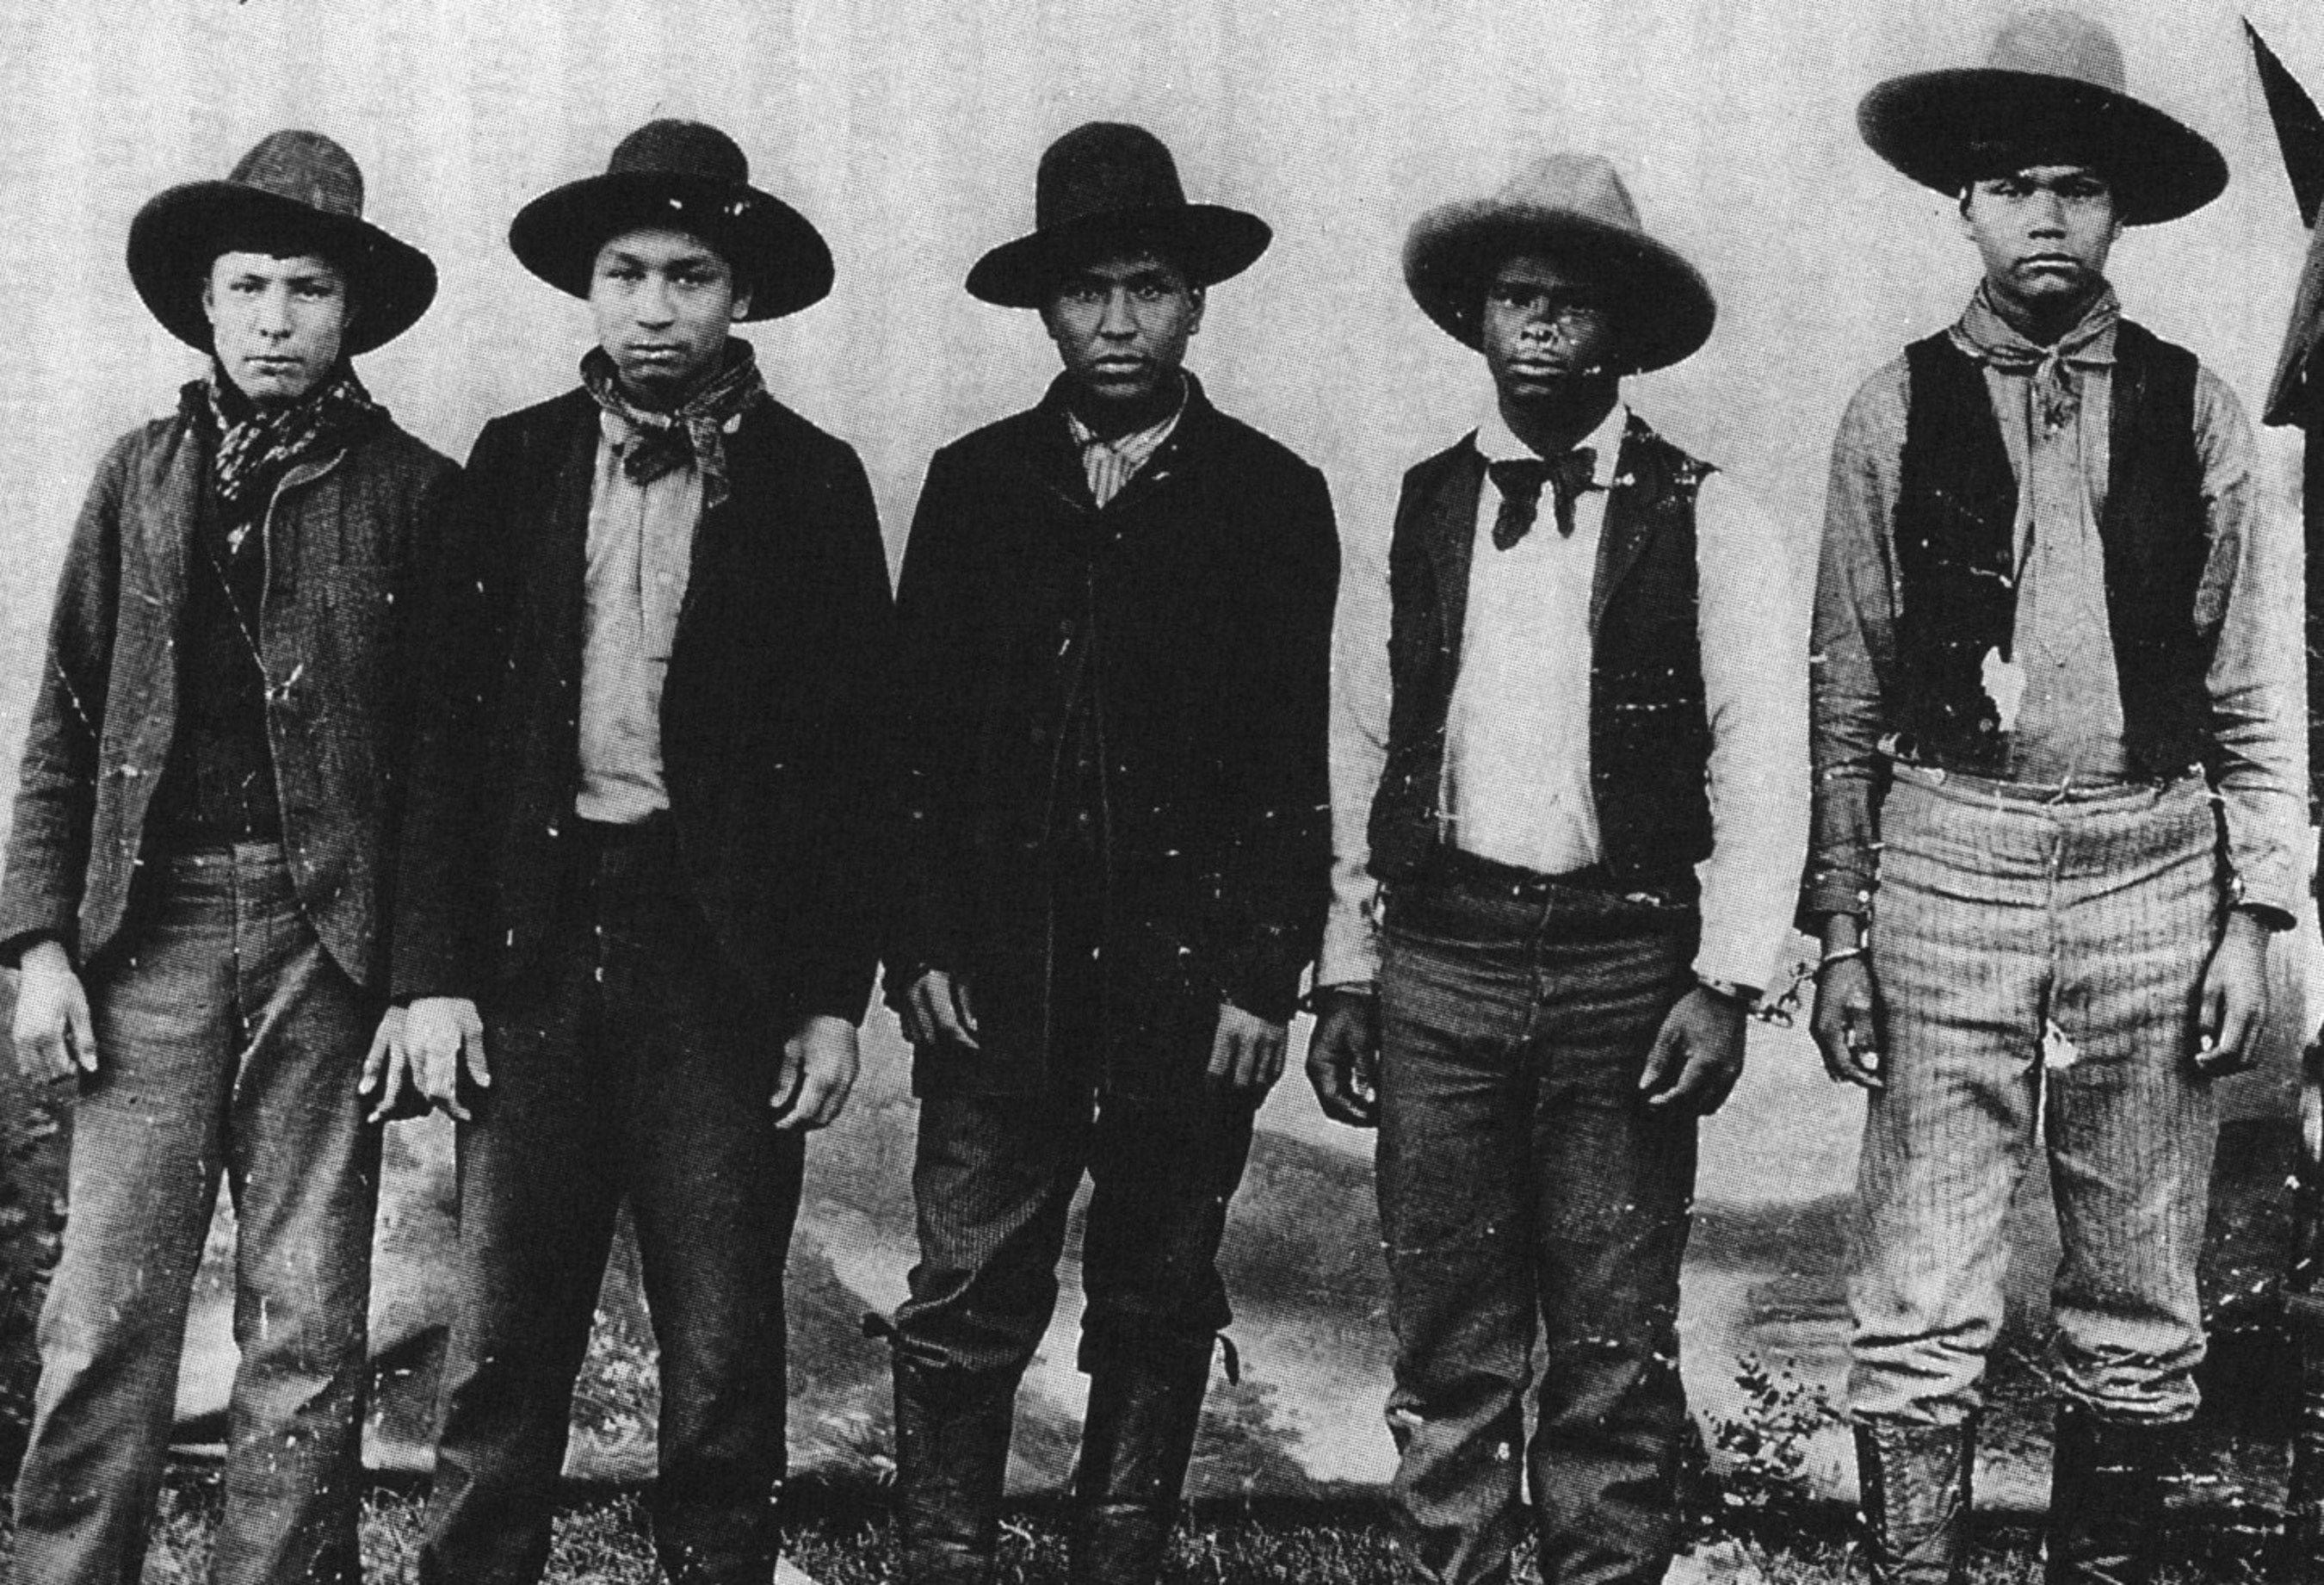 Cowboys Outlaw Logo - The Most Notorious Black and Indian Outlaws of the Old West